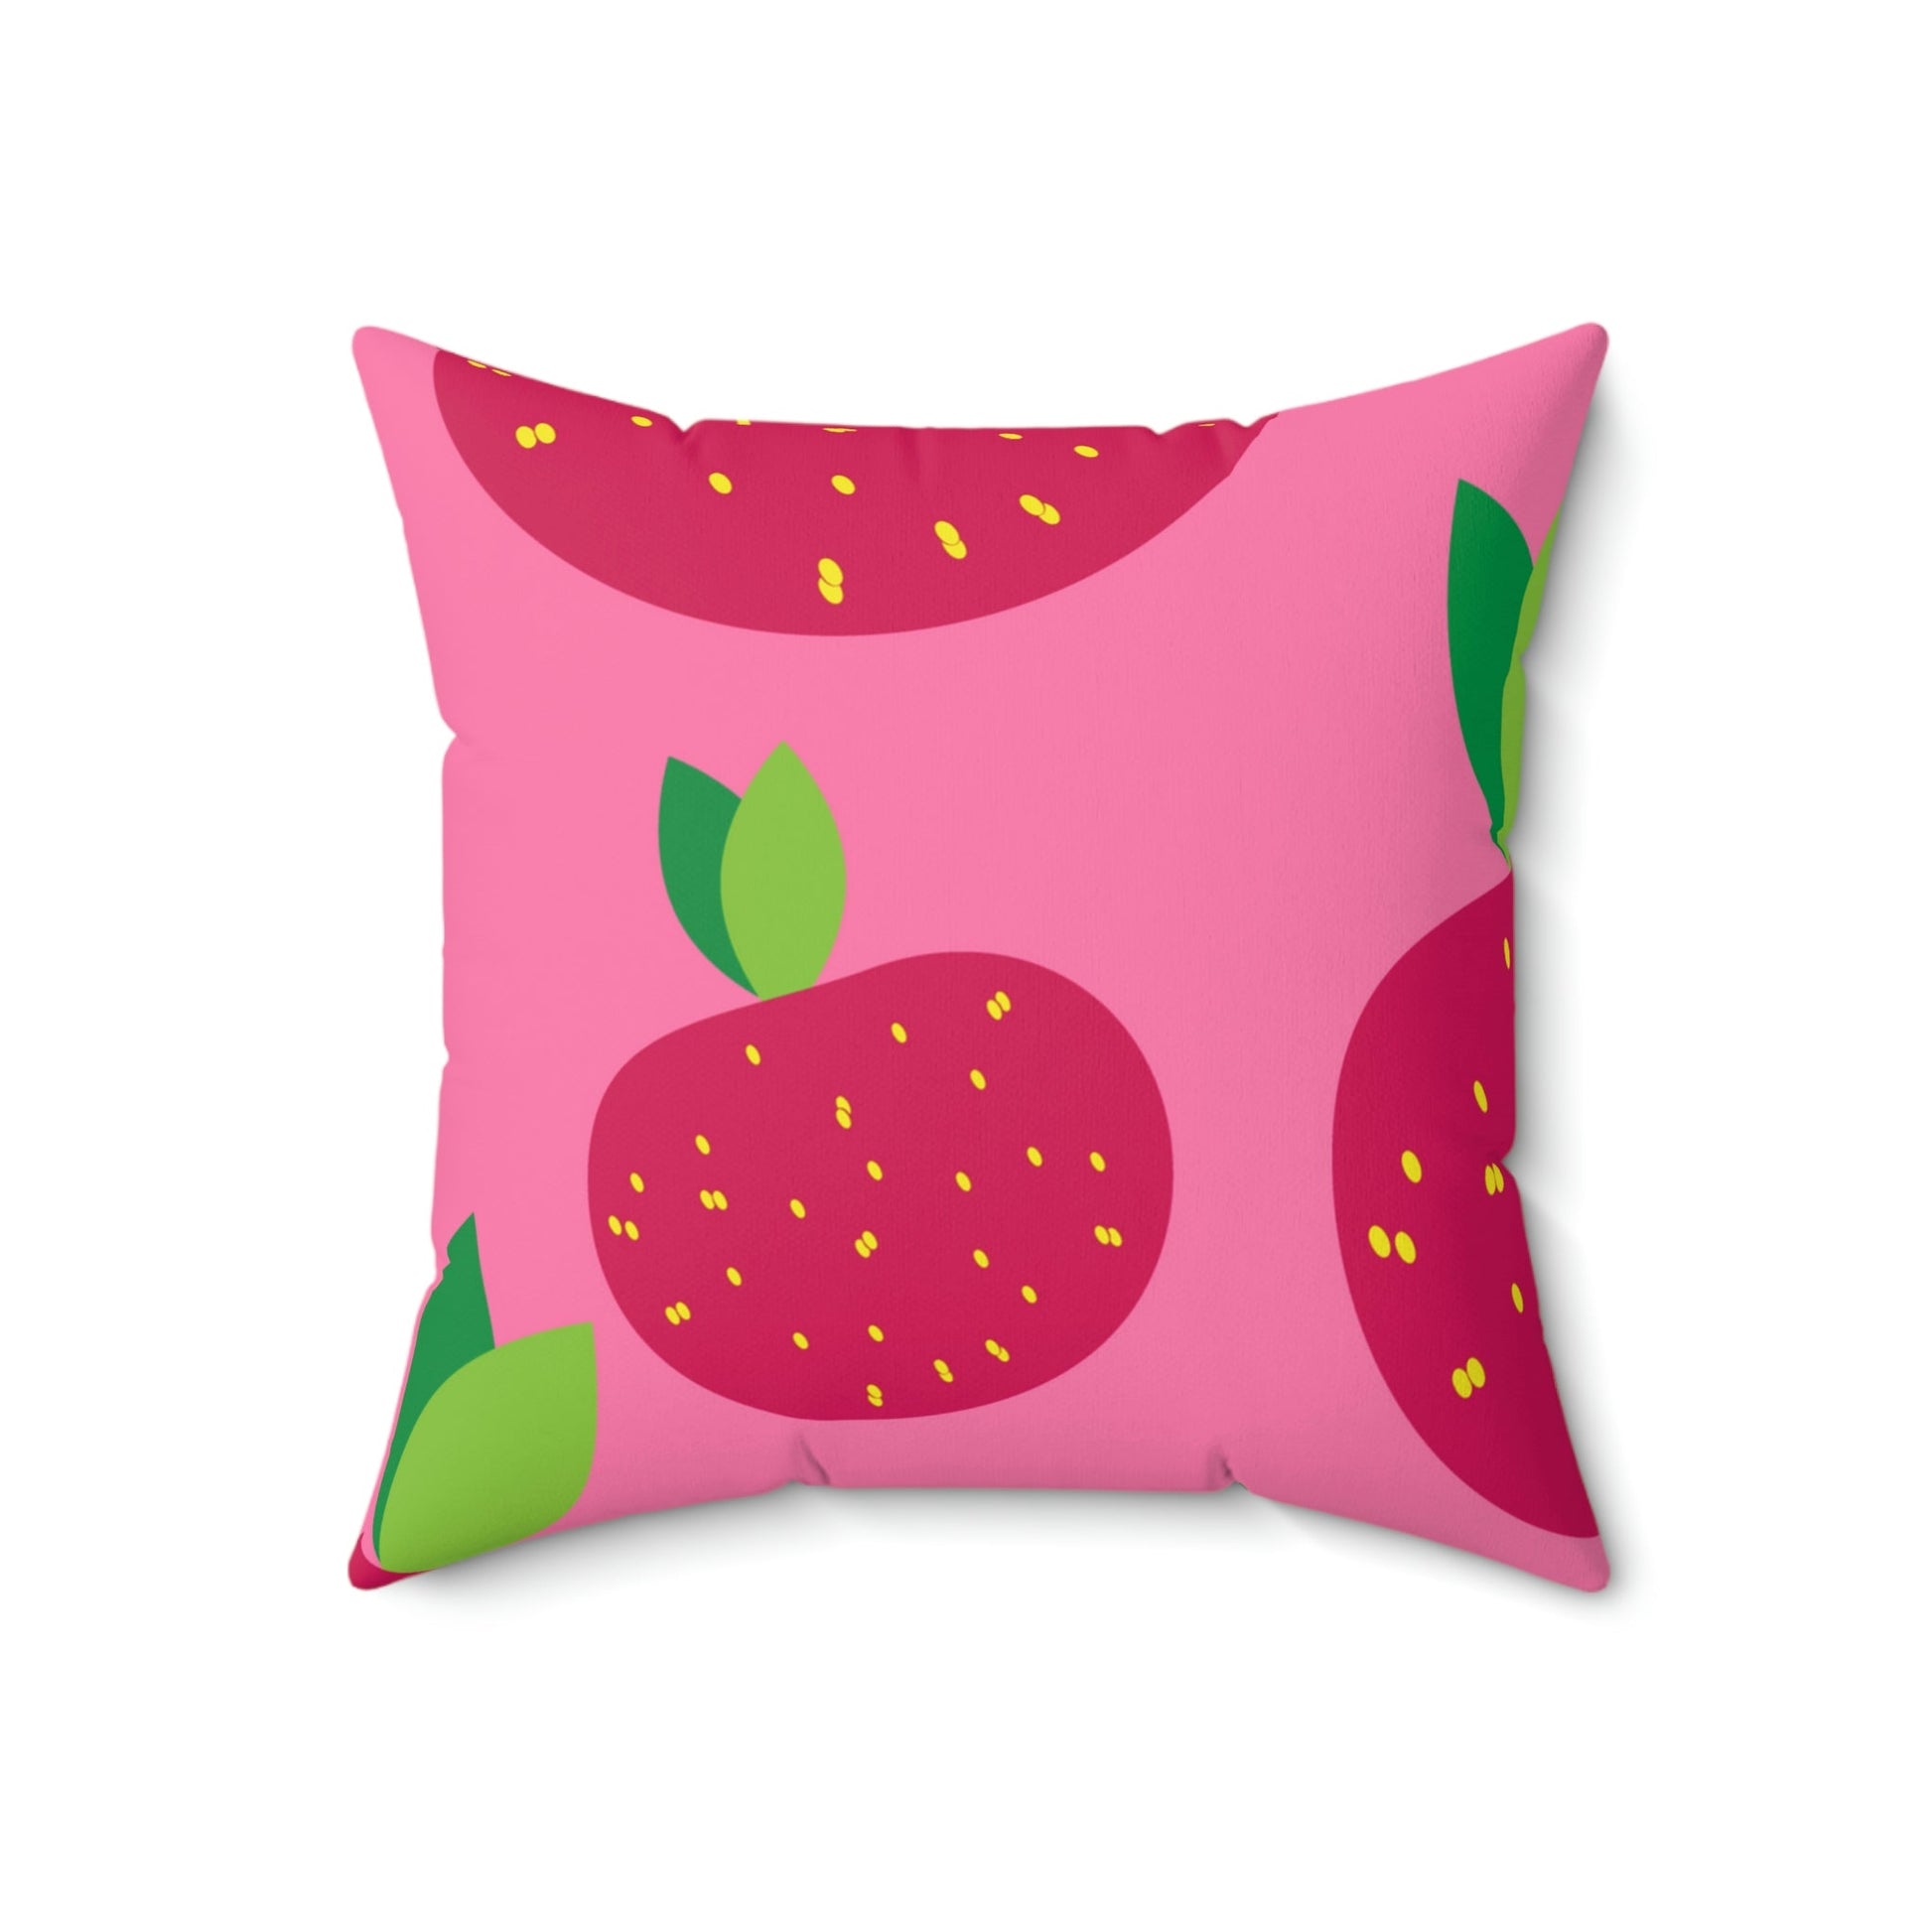 Juicy Red Fruit Square Pillow Home Decor Pink Sweetheart